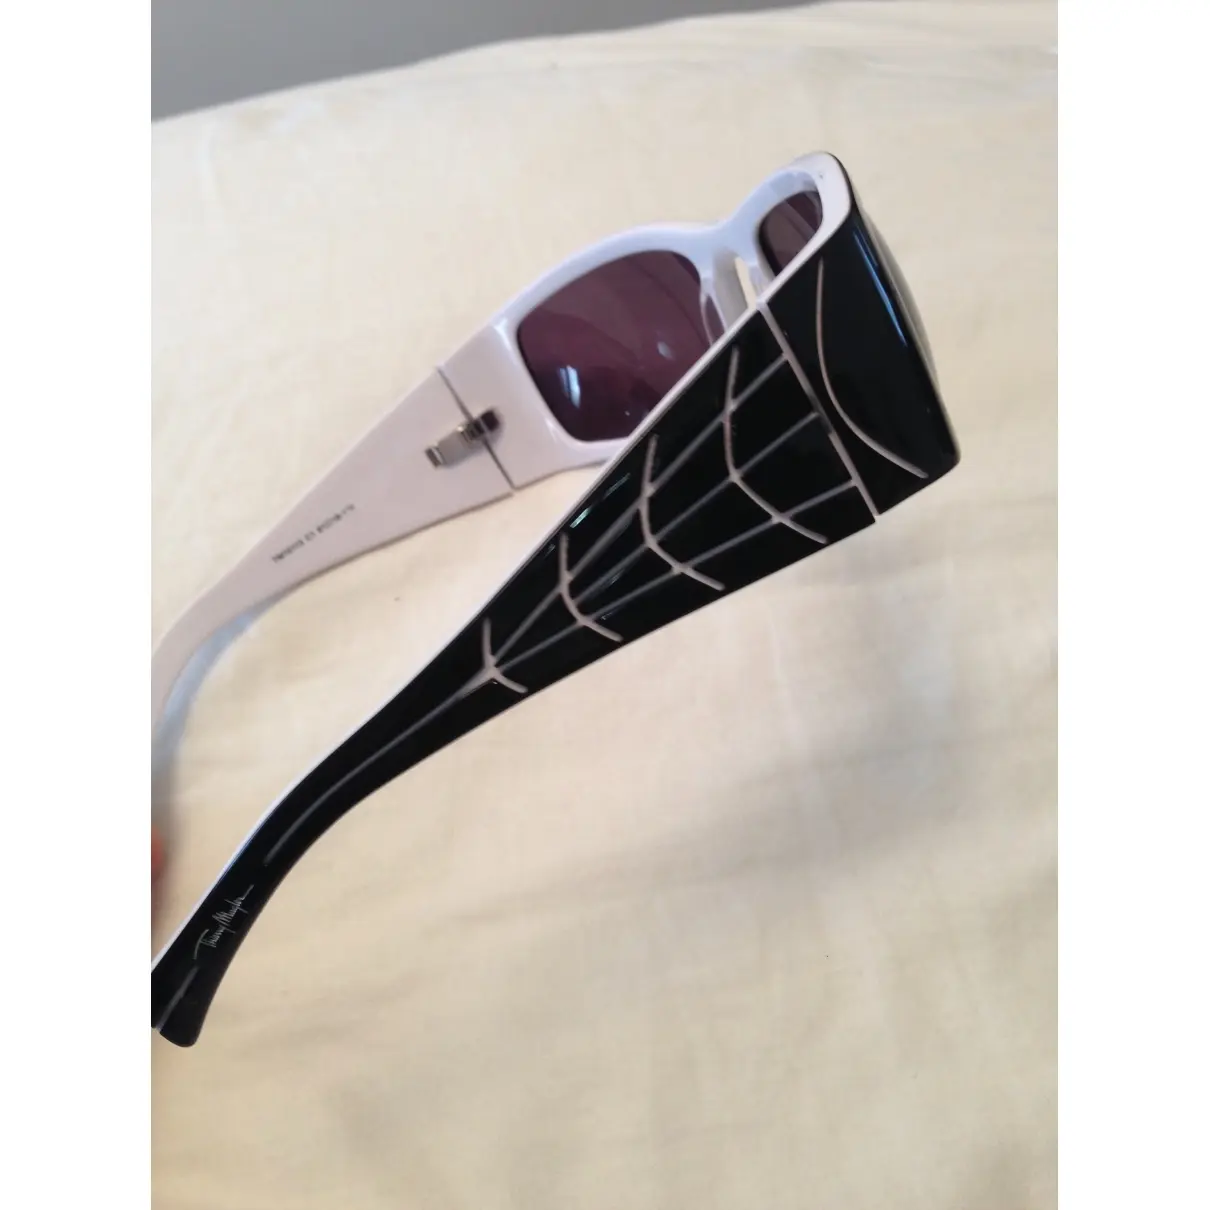 Thierry Mugler Sunglasses for sale - Vintage